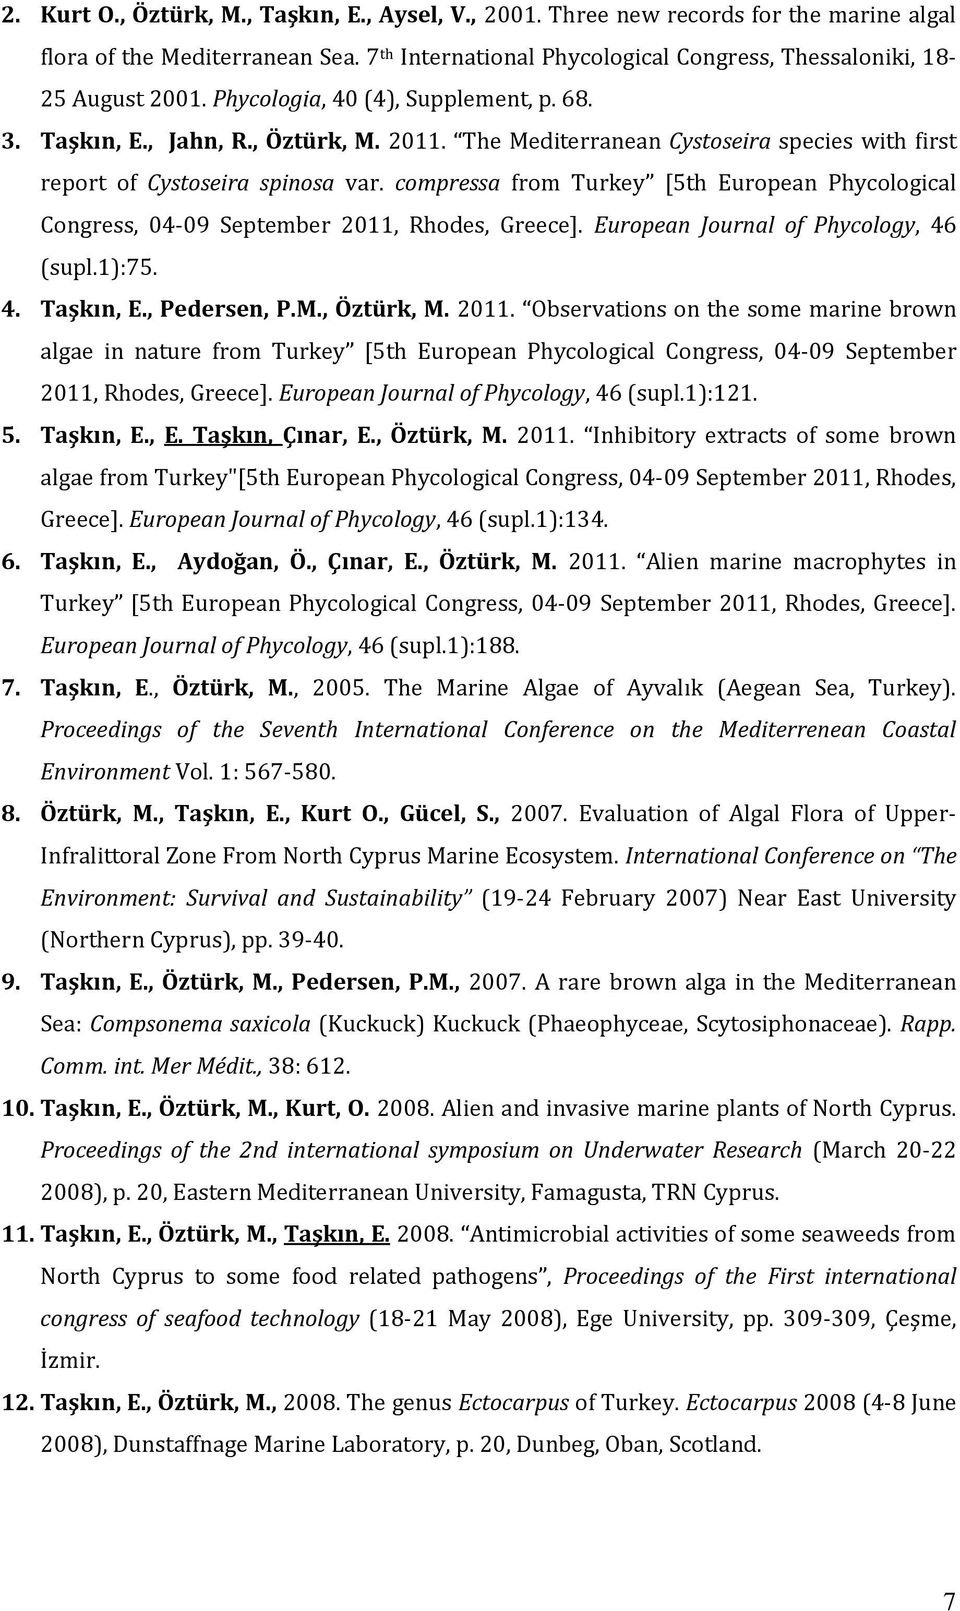 compressa from Turkey [5th European Phycological Congress, 04-09 September 2011,